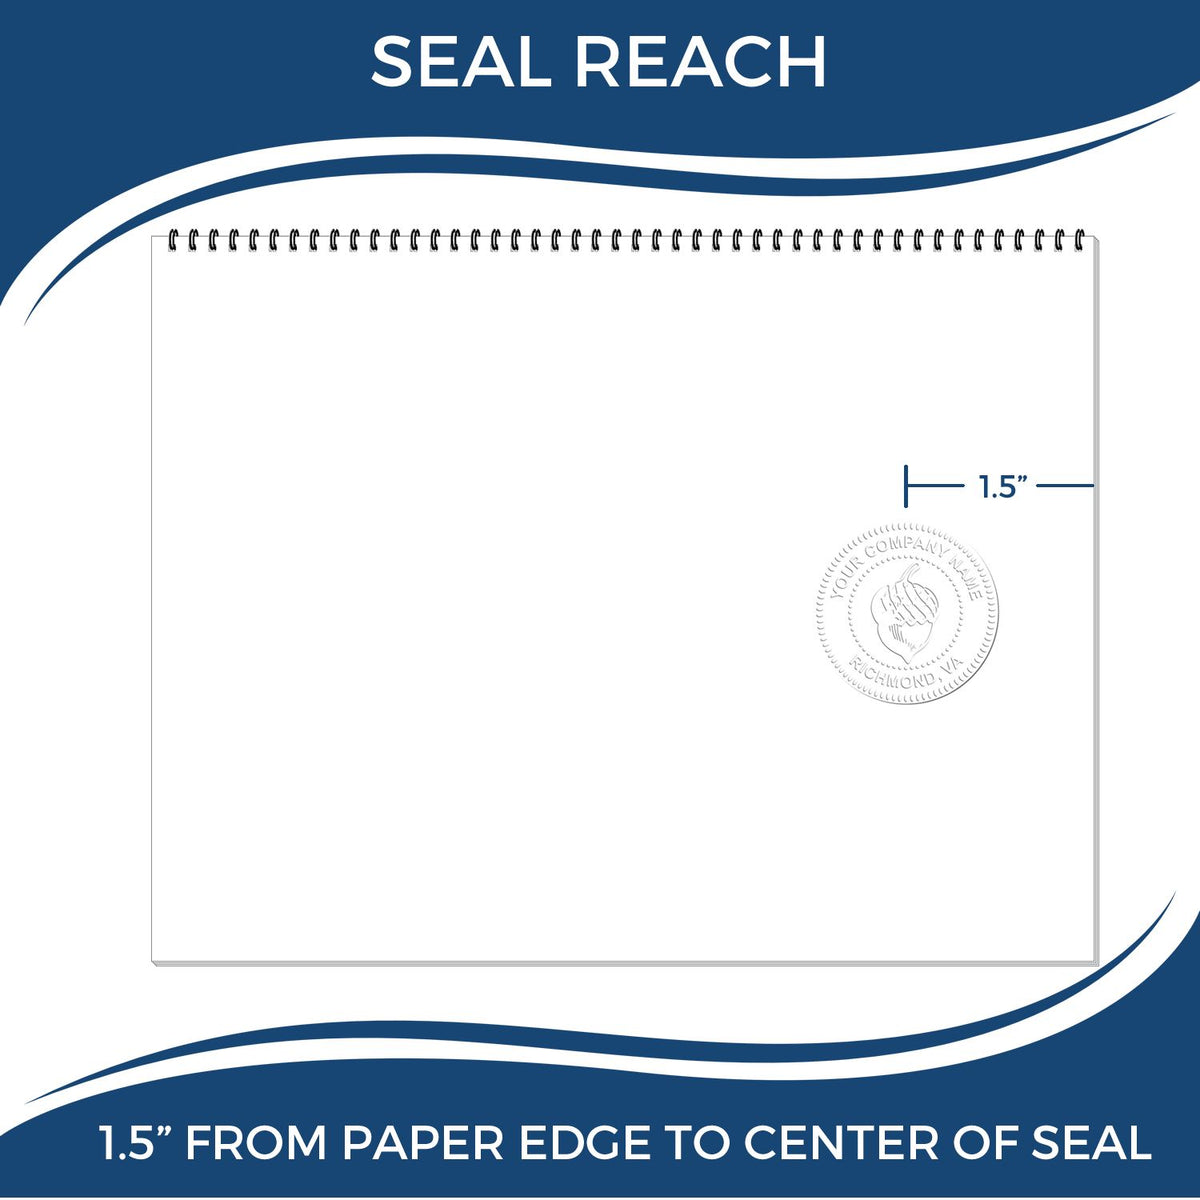 An infographic showing the seal reach which is represented by a ruler and a miniature seal image of the Gift Alaska Architect Seal